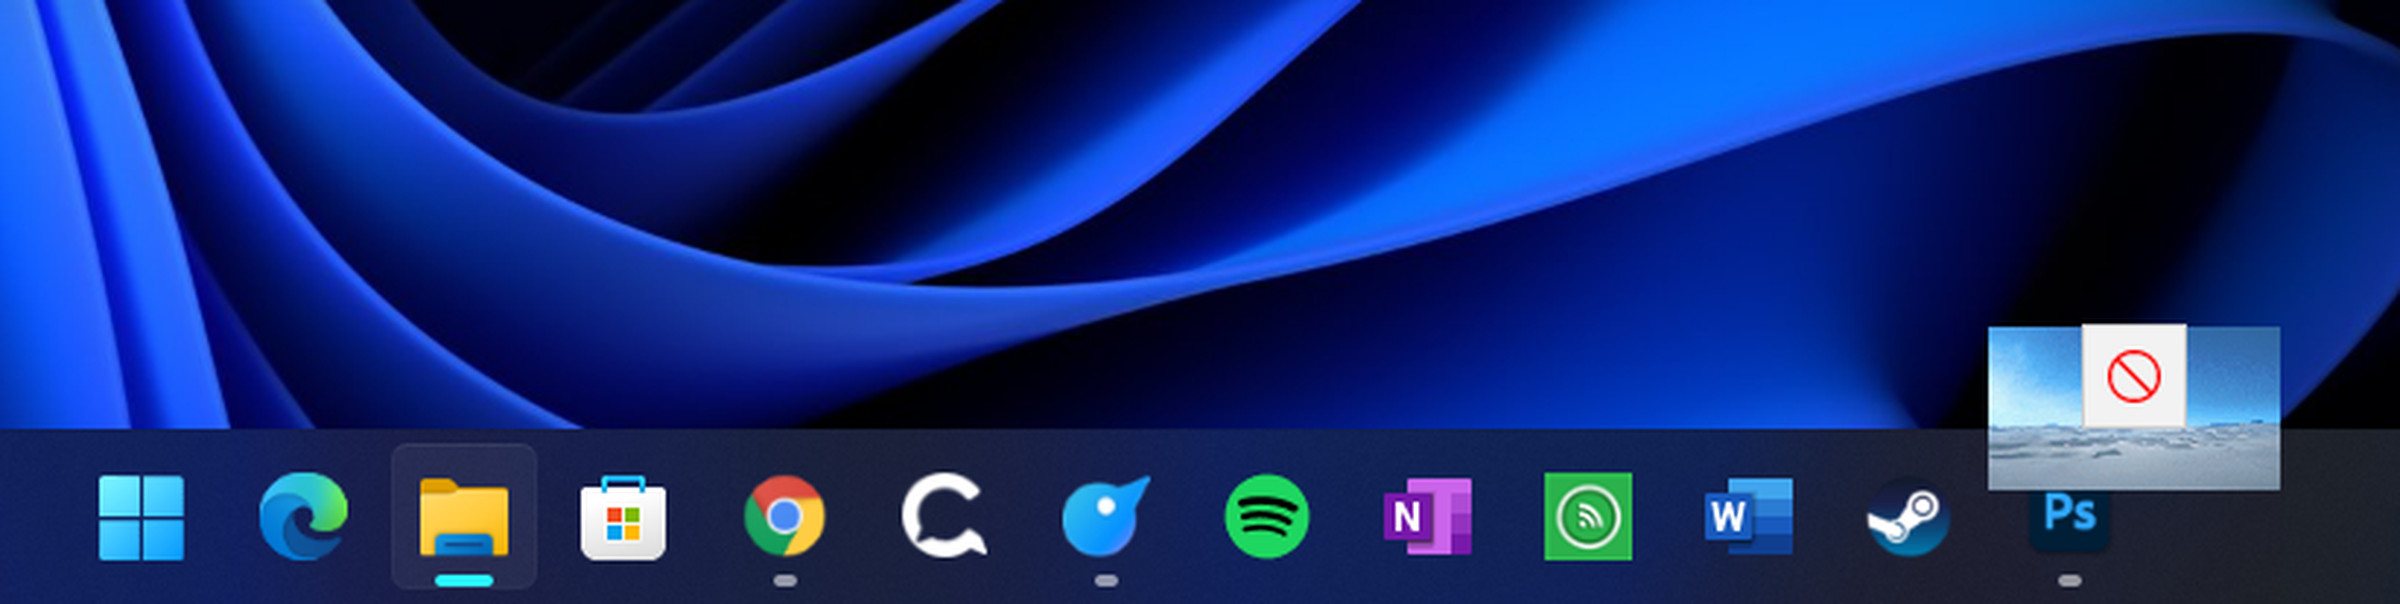 No more dragging and dropping on the taskbar.